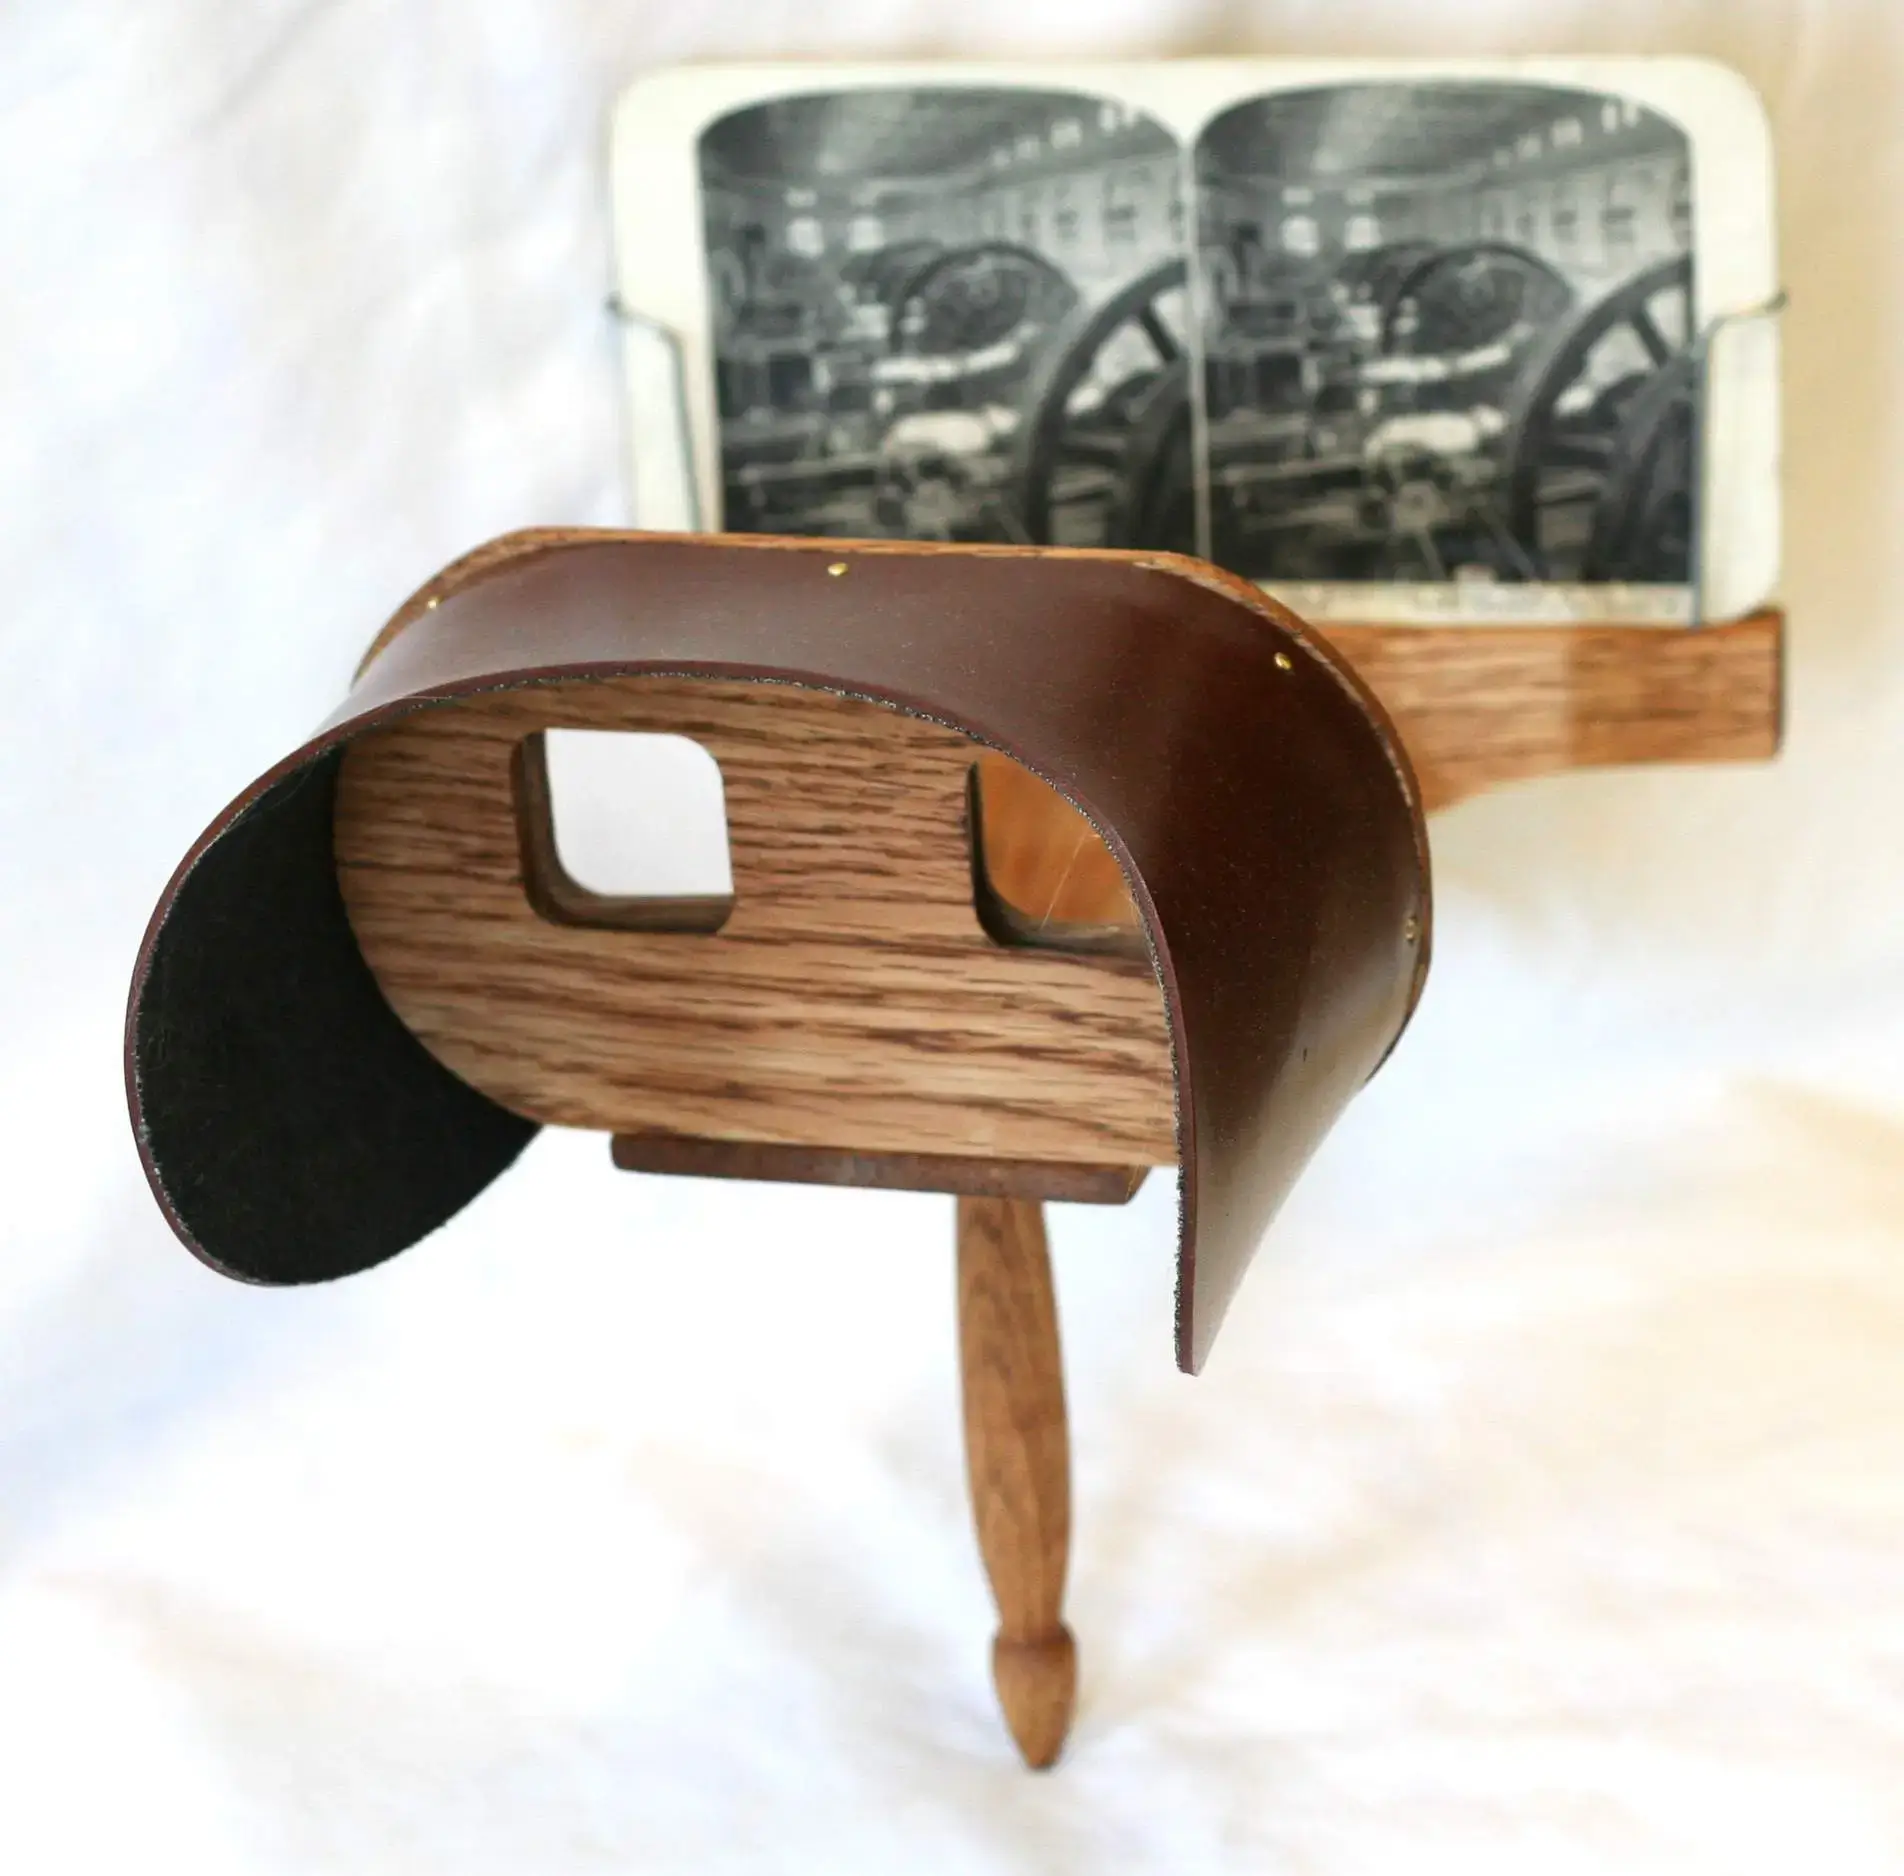 A Holmes stereoscope, the most popular form of 19th century stereoscope (Source: Wikipedia)